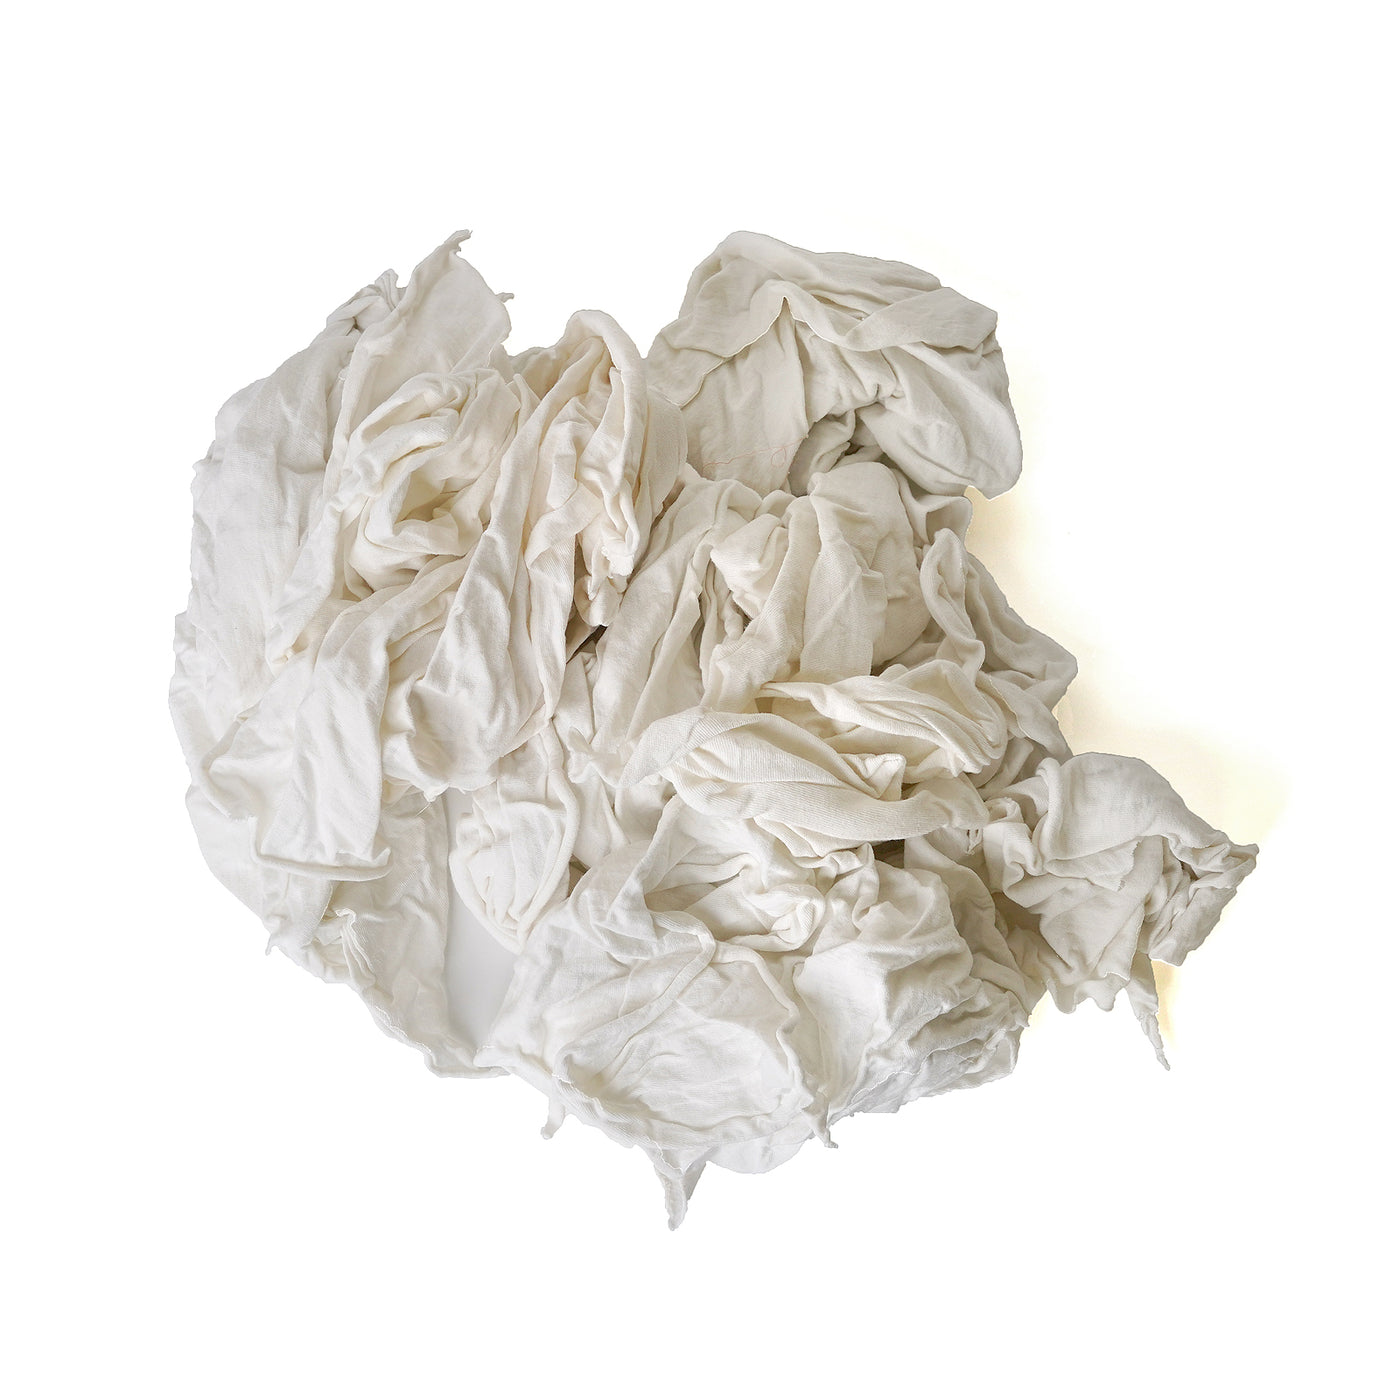 White Recycled T-Shirt Rags - 100% Cotton Cleaning Rags - 8x25 lbs